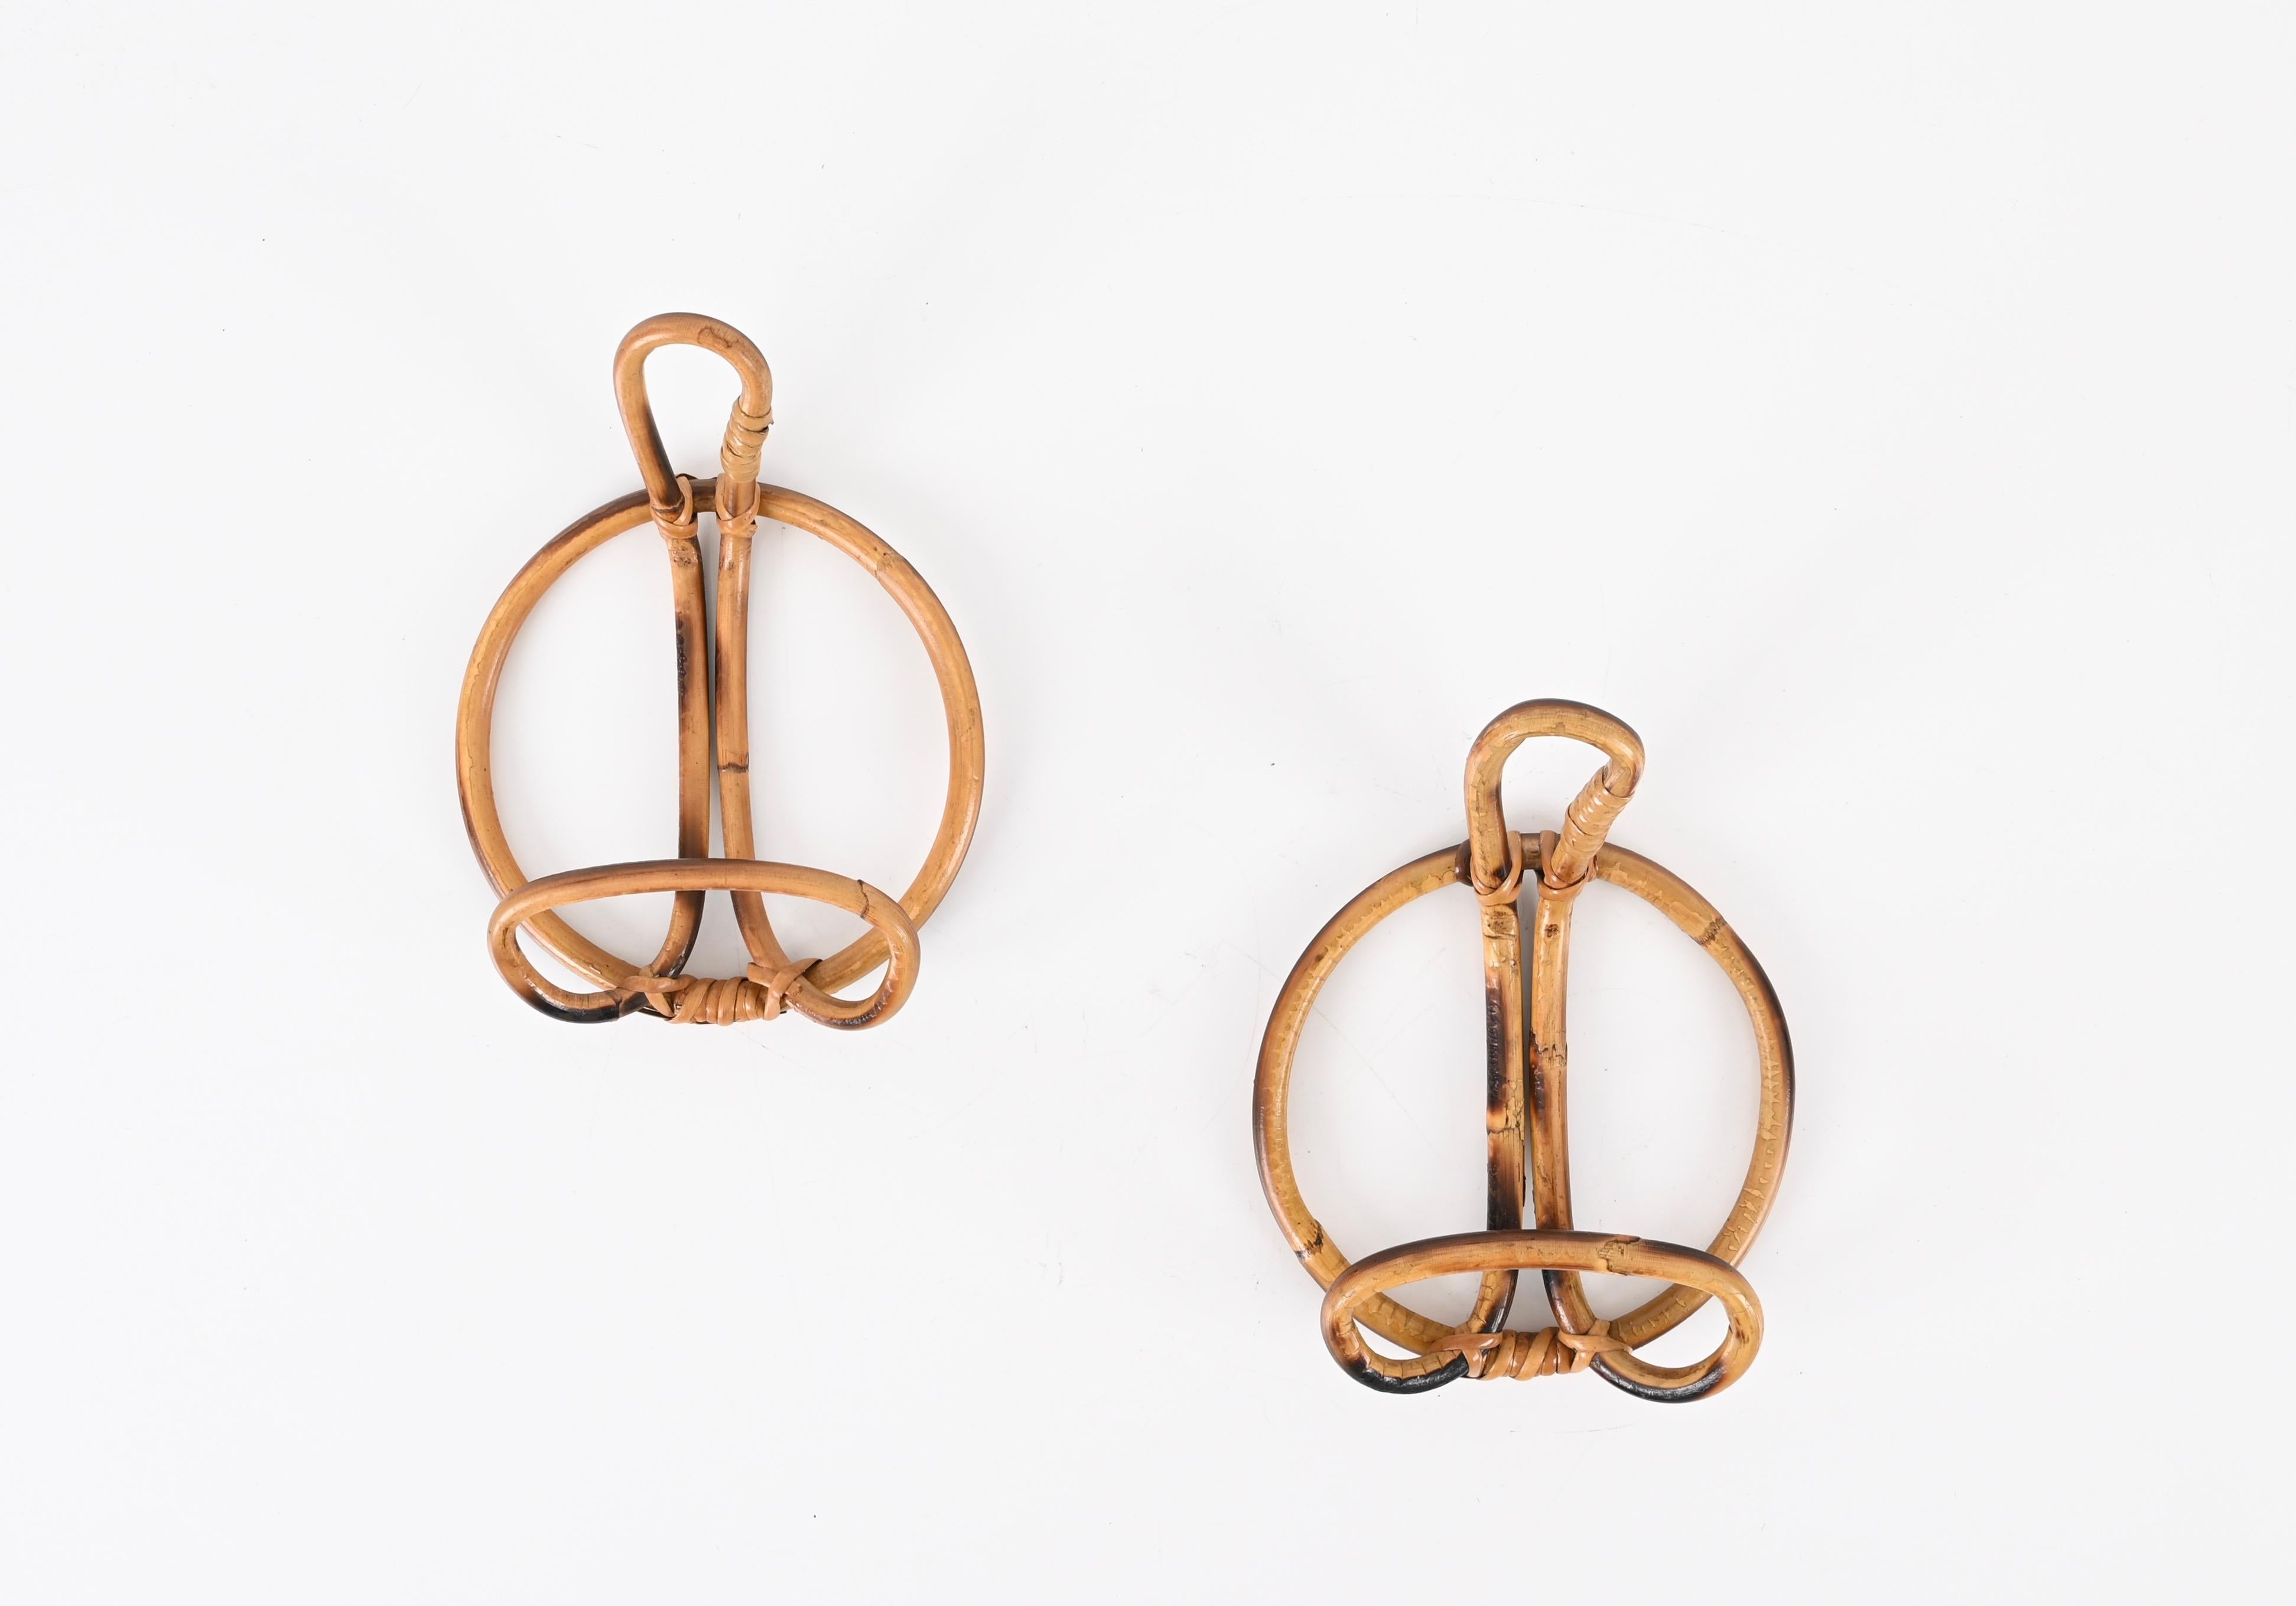 Beautiful set of two French Riviera round coat hangers in curved rattan and wicker. These stylish coat hooks were designed in Italy during the 1960s following the French Riviera trend.

These gorgeous items feature a sturdy round frame that holds a